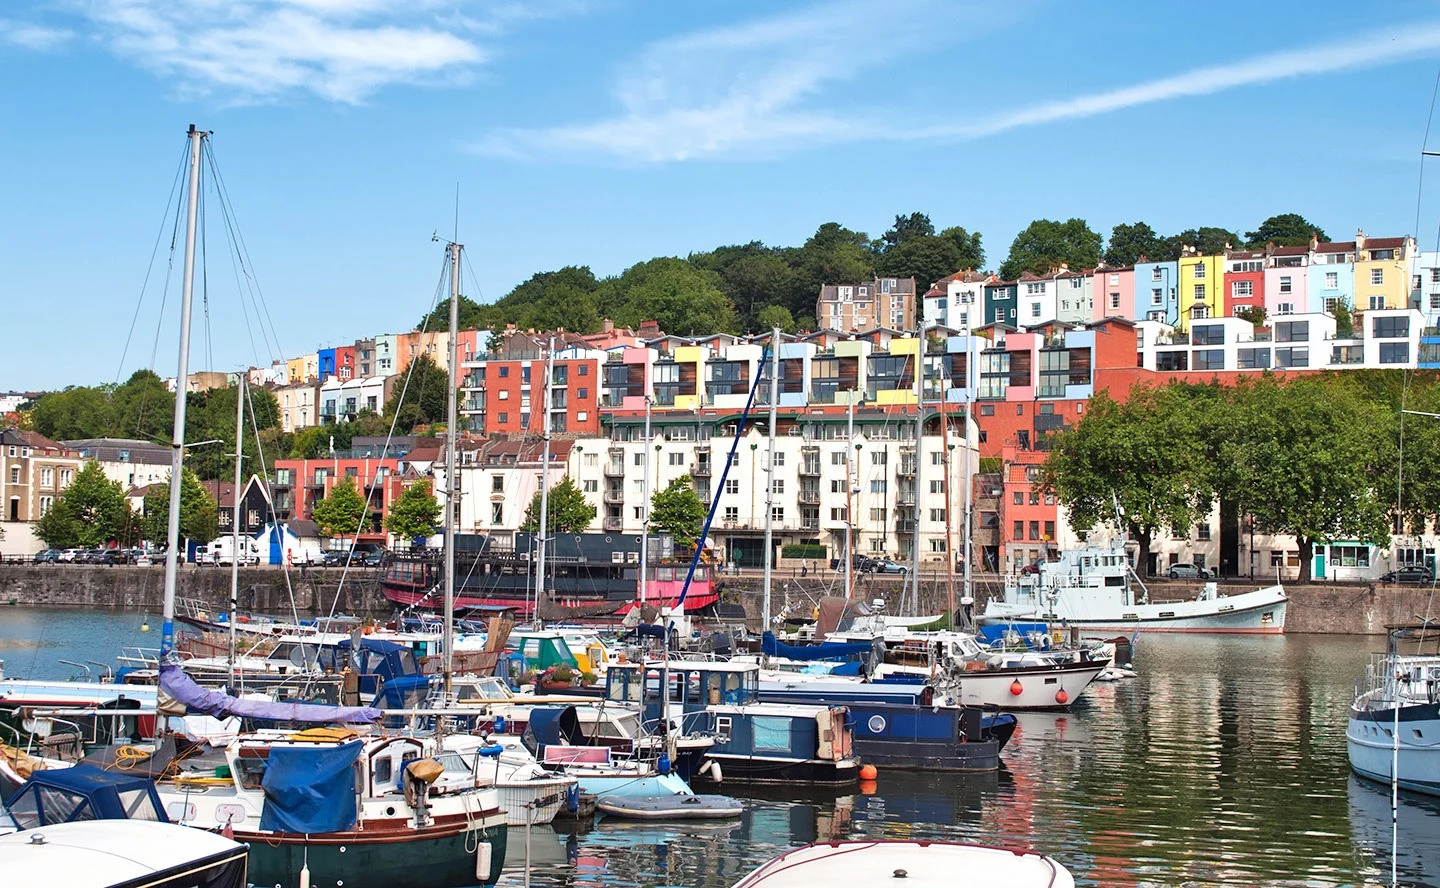 Bristol's colourful waterfront